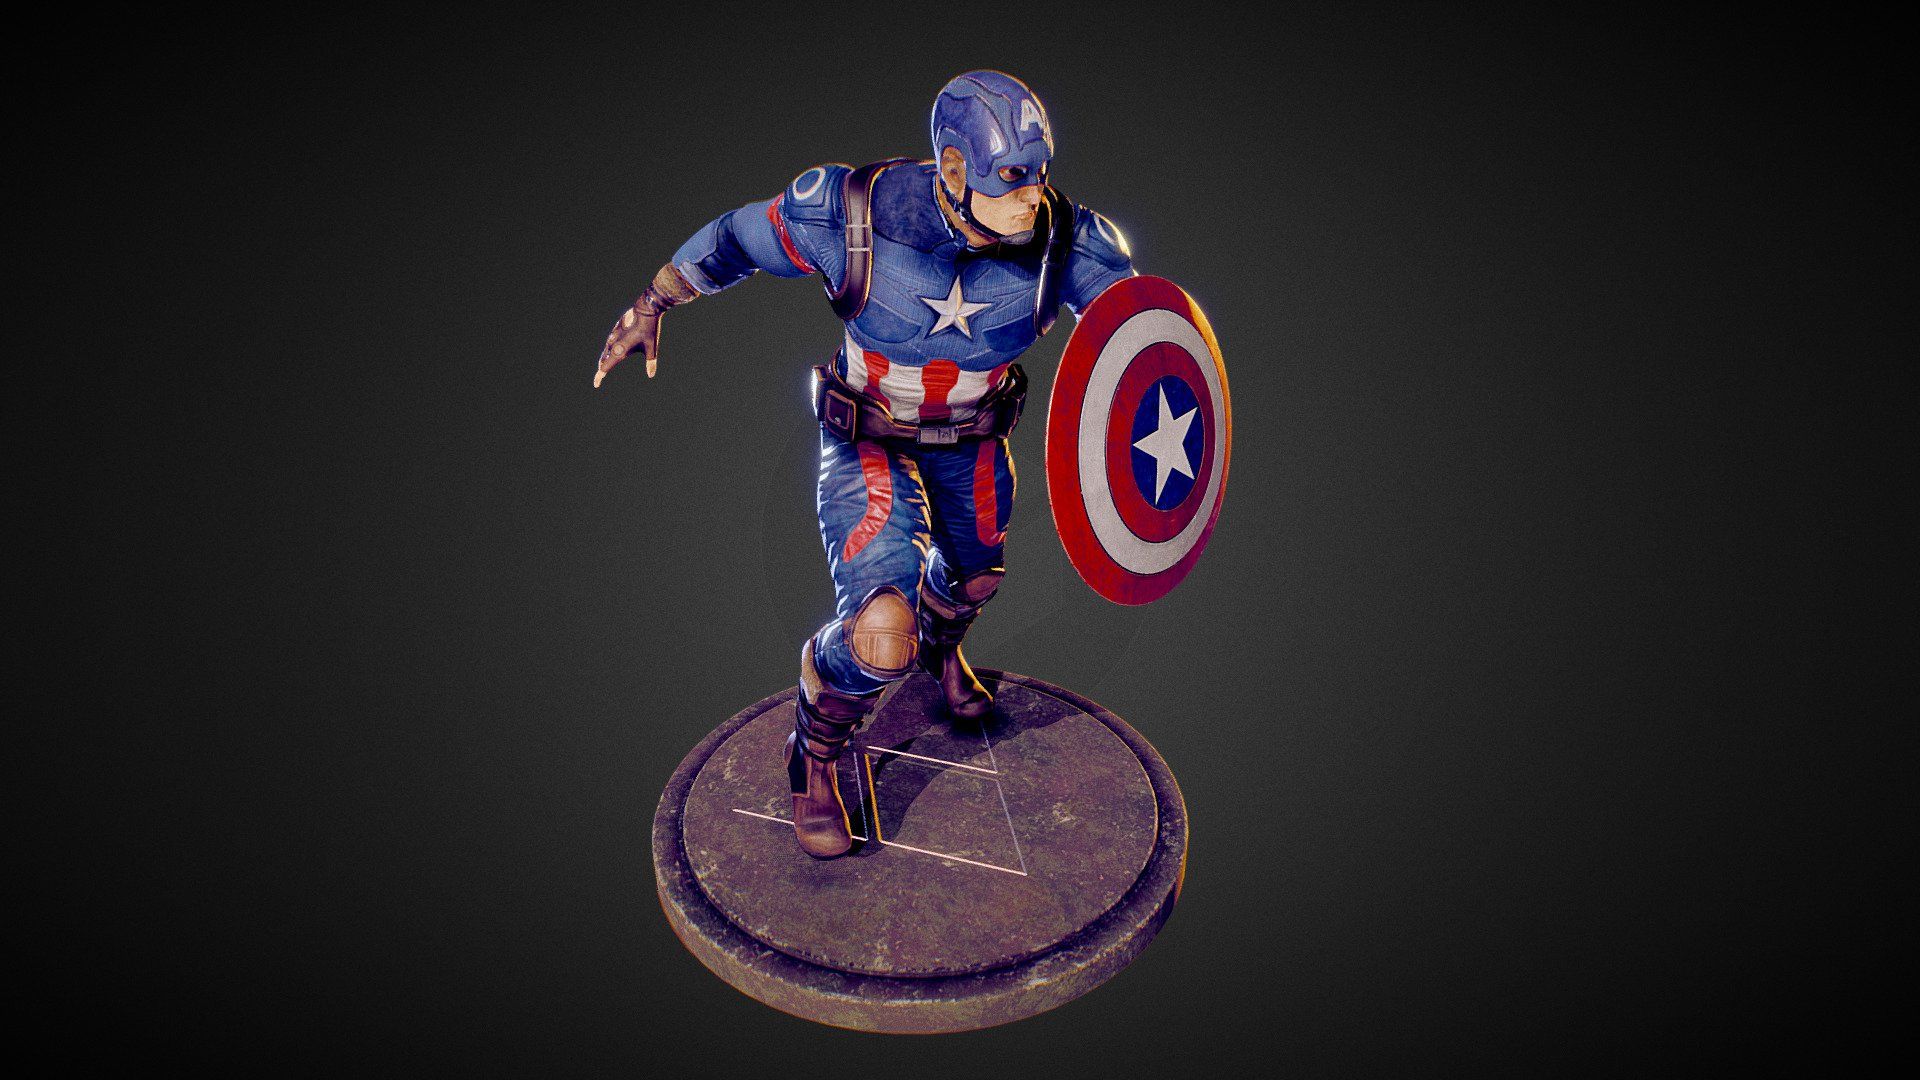 Captain America Royalty Free 3D model by FabioNuzzo90 [5a6996c]